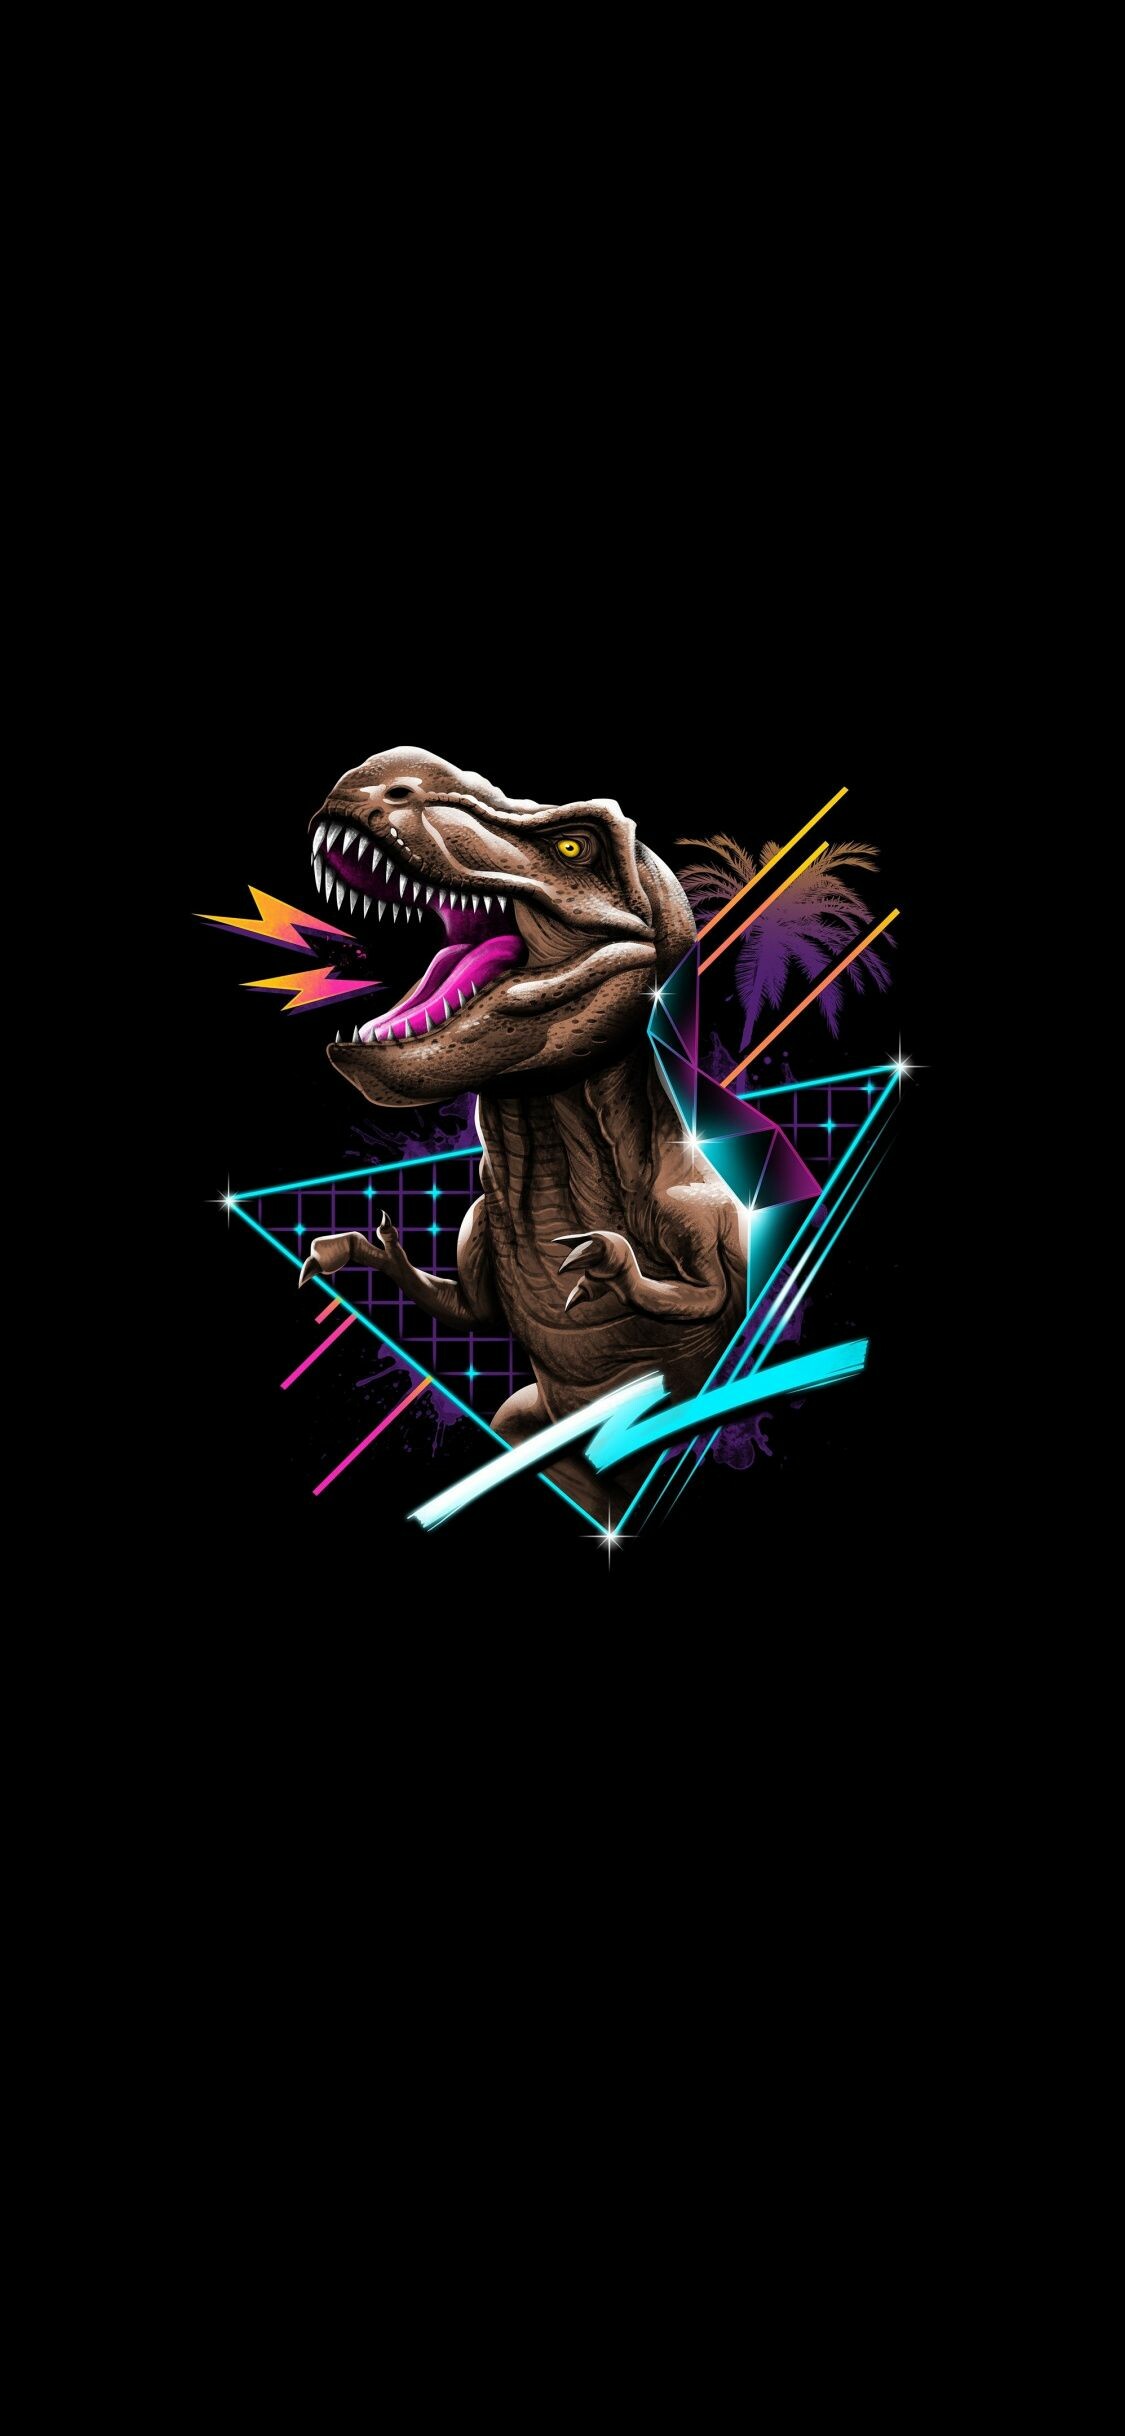 Jurassic World: Dinosaur, An American science fiction media franchise created by Michael Crichton. 1130x2440 HD Background.